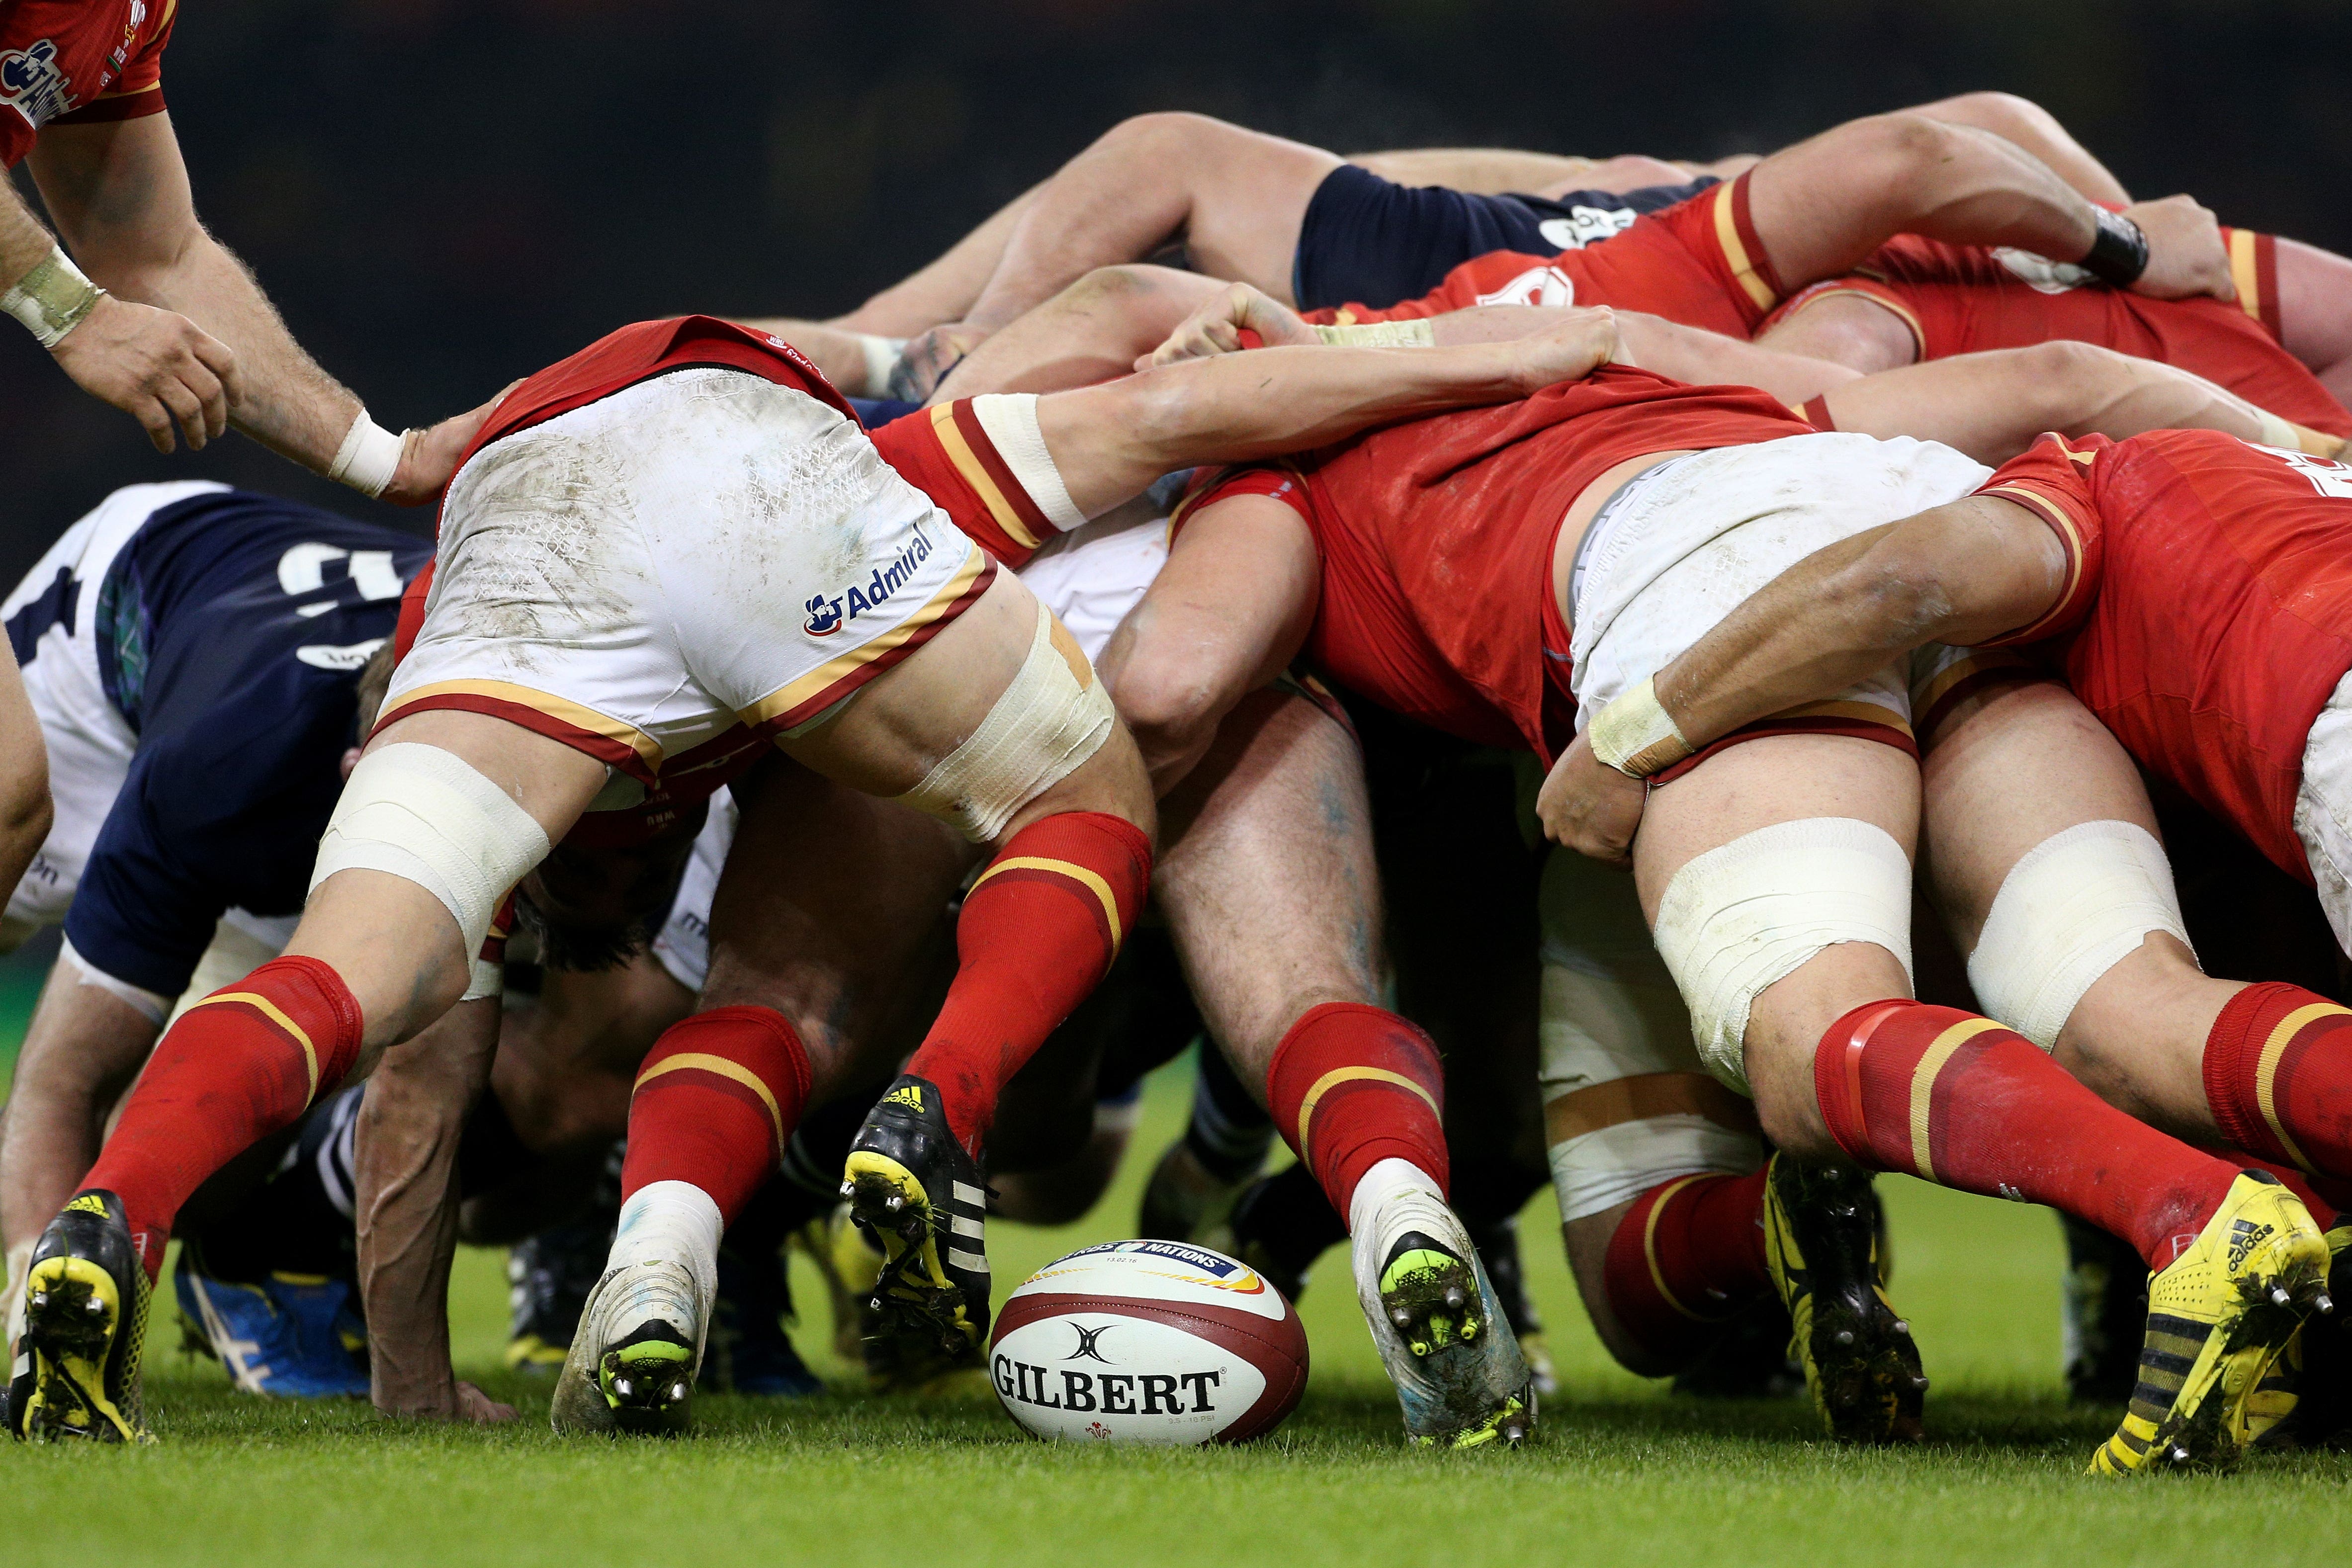 Wales’ professional players could consider strike action over a new contracts freeze in Welsh rugby (David Davies/PA Images).